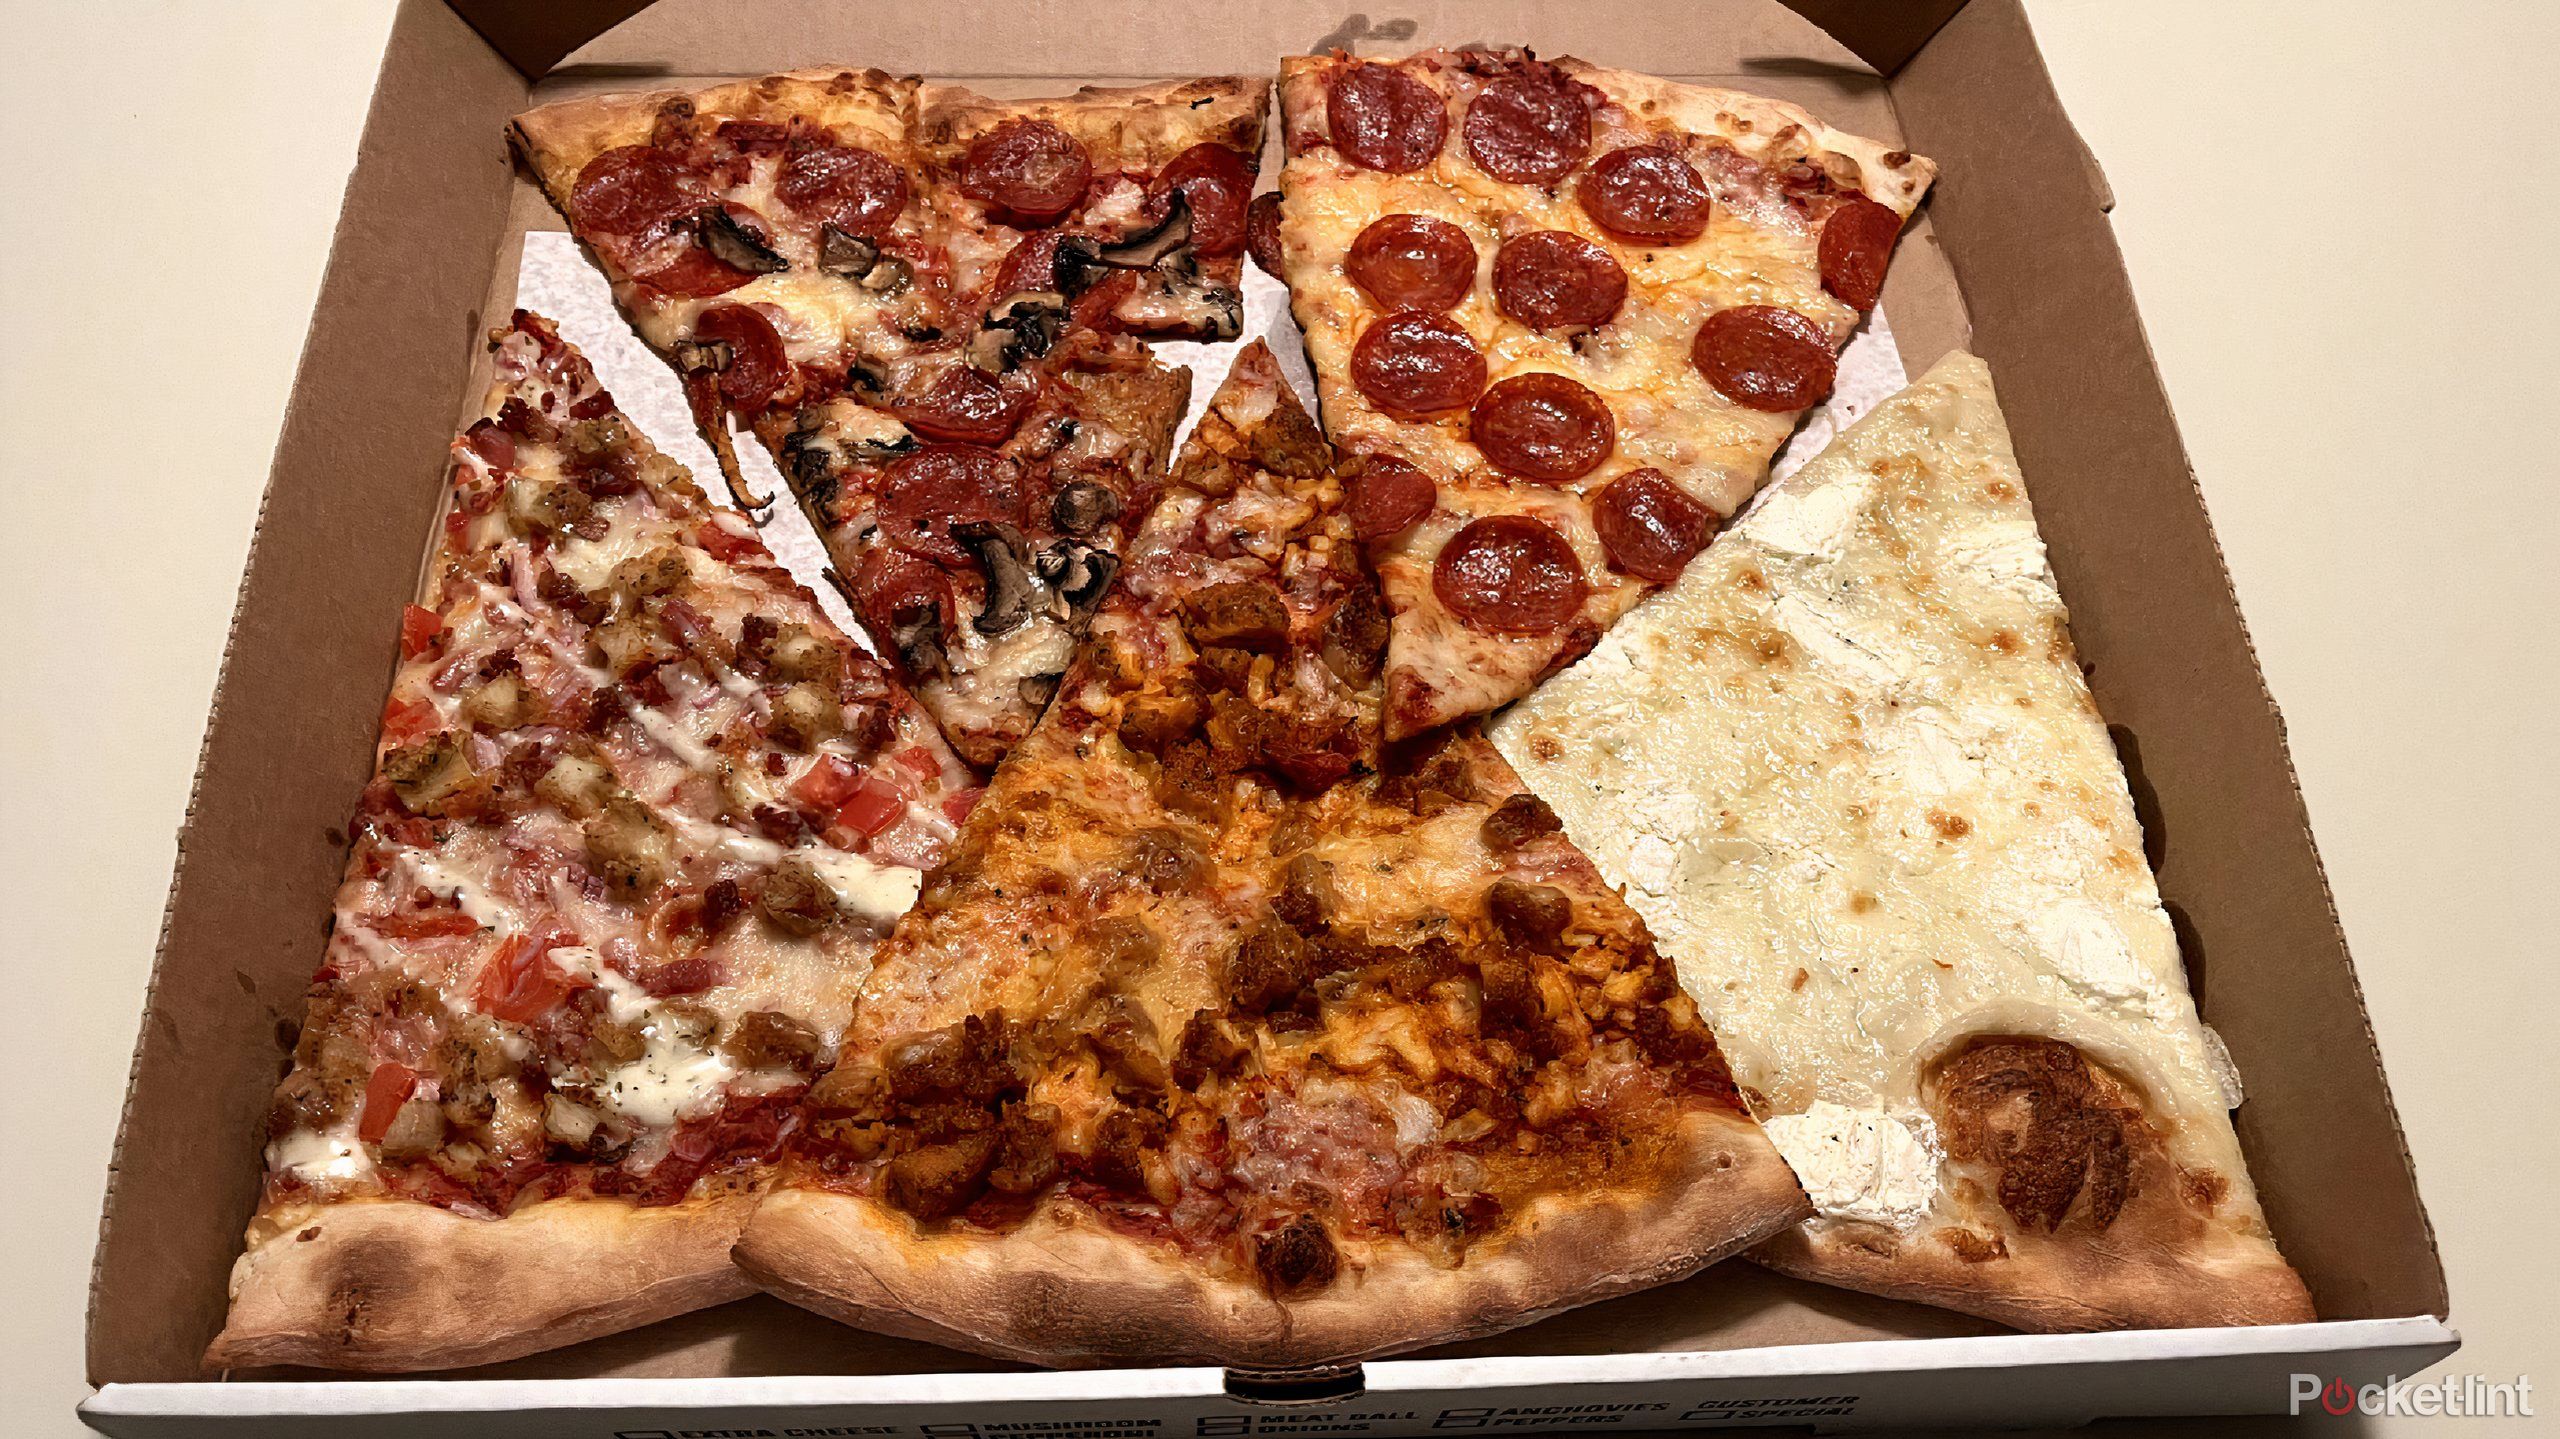 A box filled with pizza slices